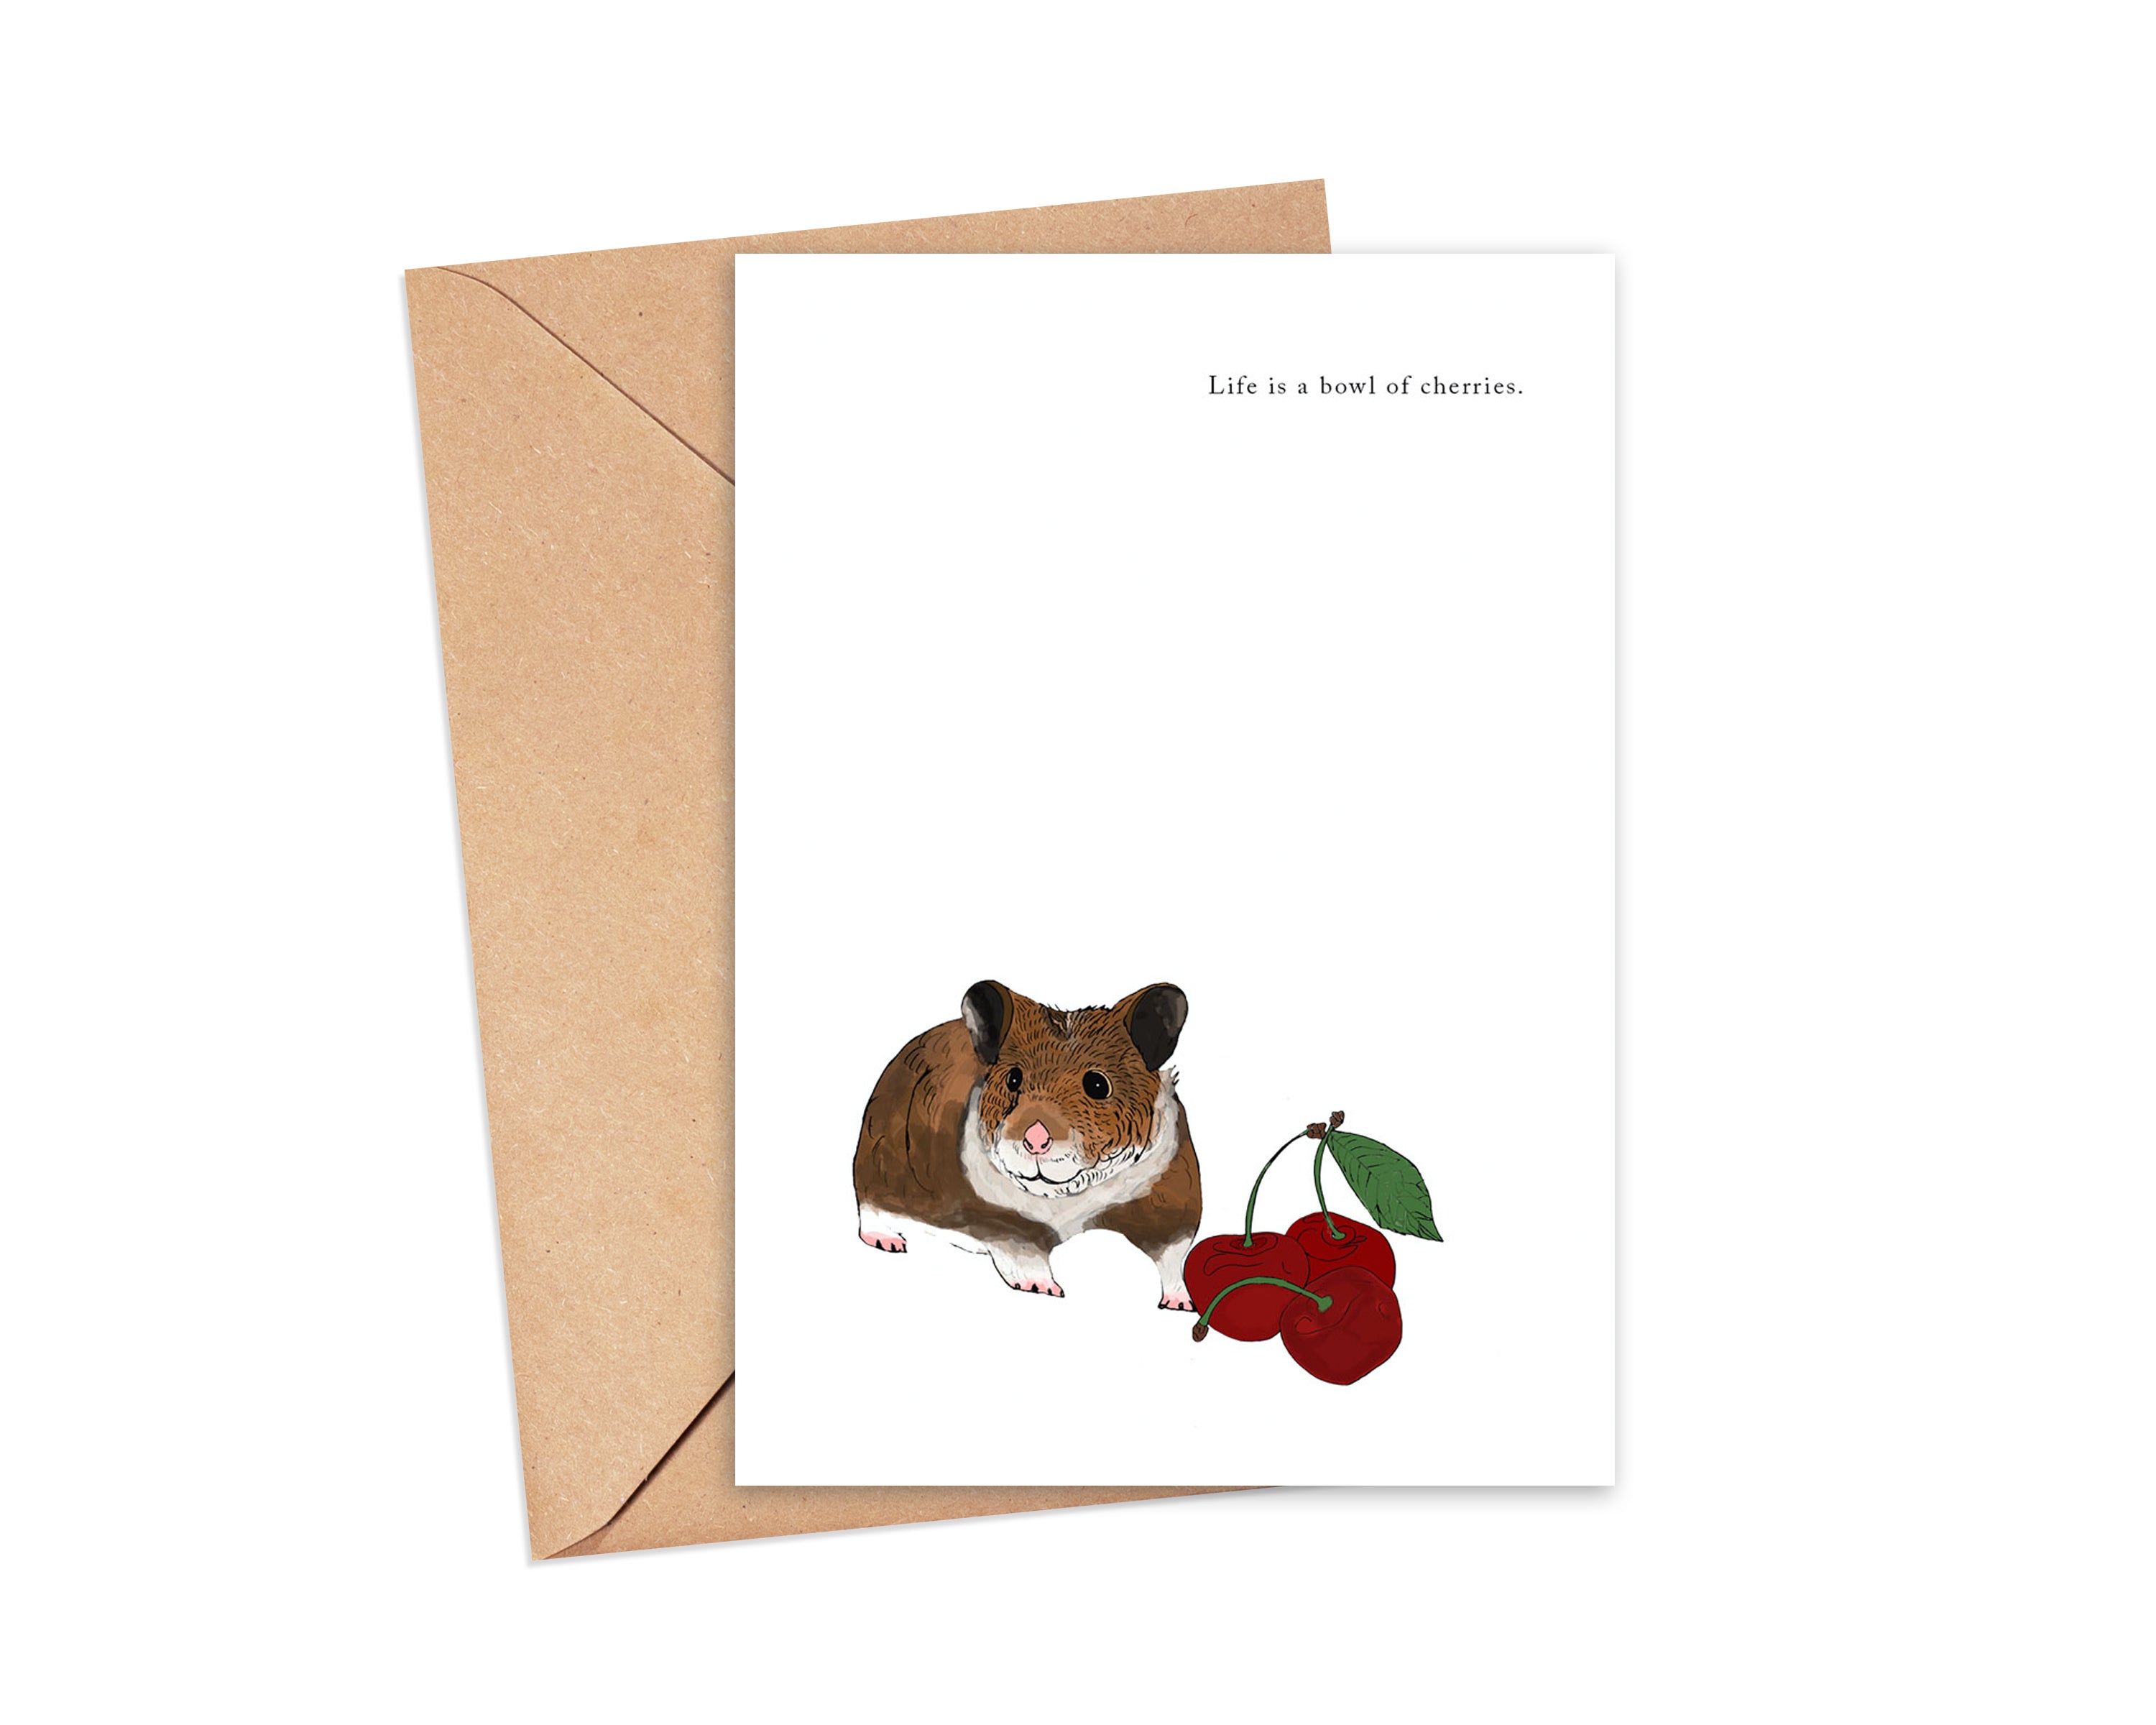 "Cherry picked" Blank Card